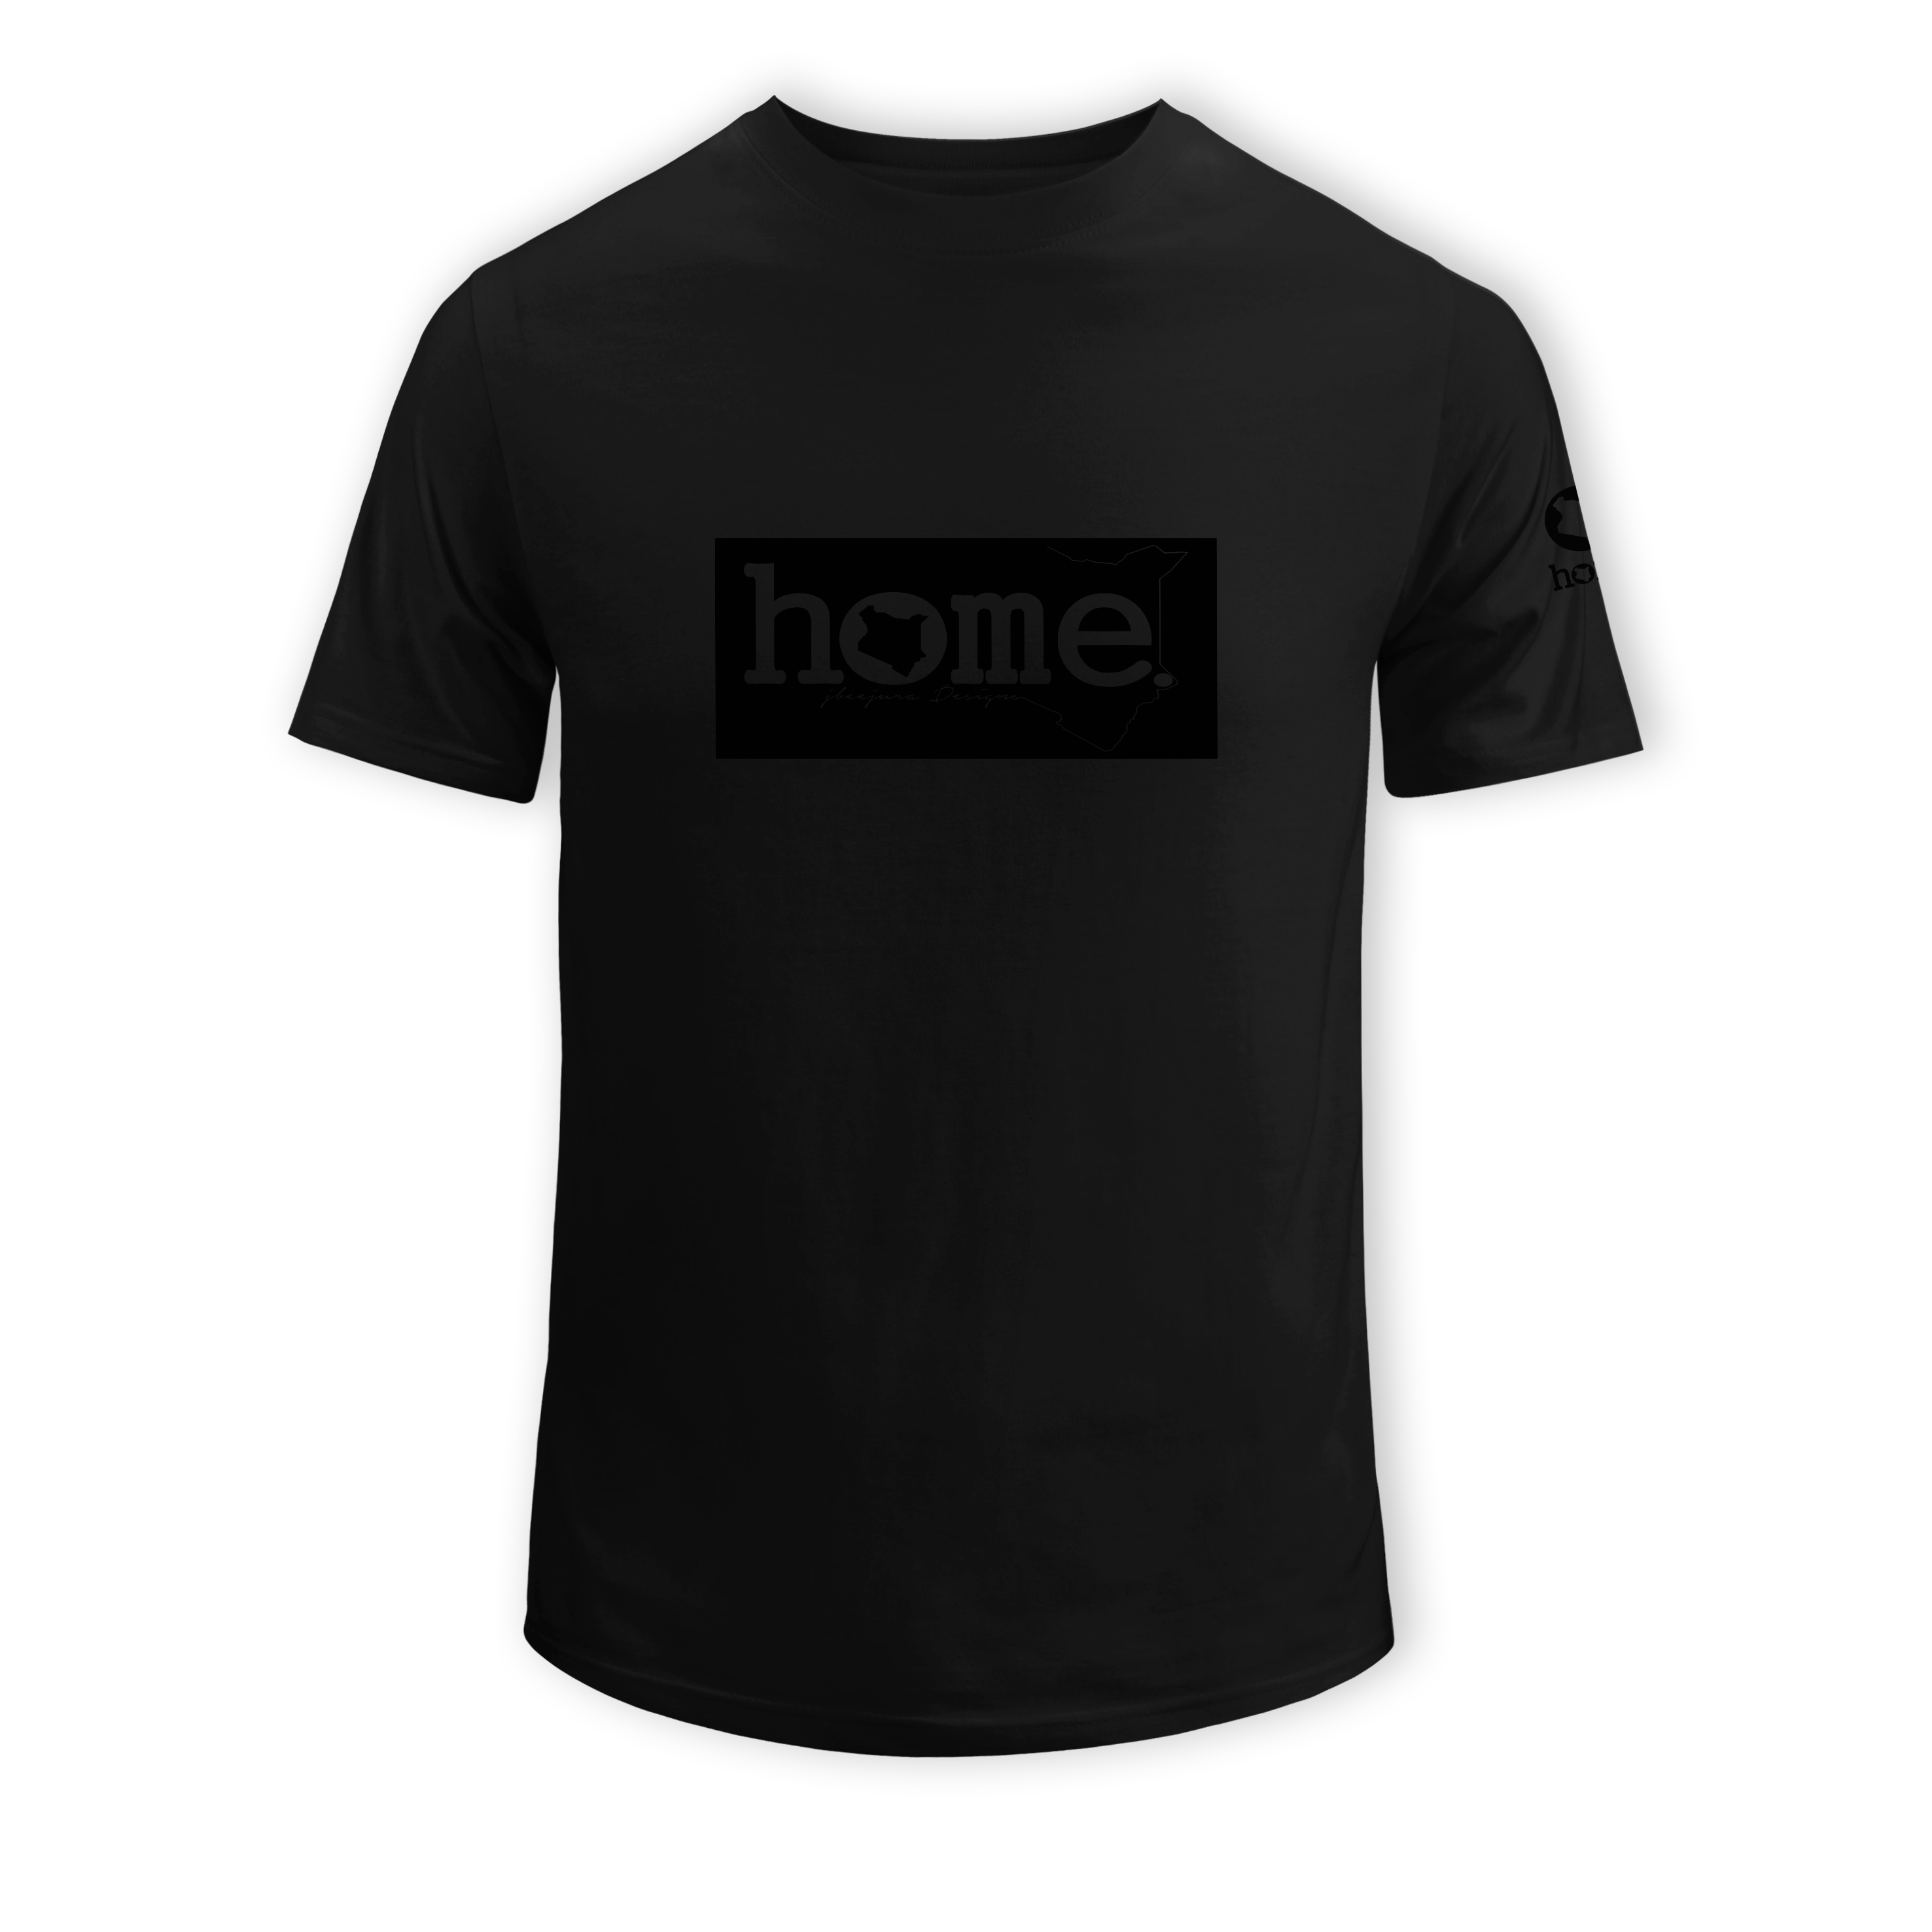 home_254 SHORT-SLEEVED BLACK T-SHIRT WITH A BLACK CLASSIC PRINT – COTTON PLUS FABRIC